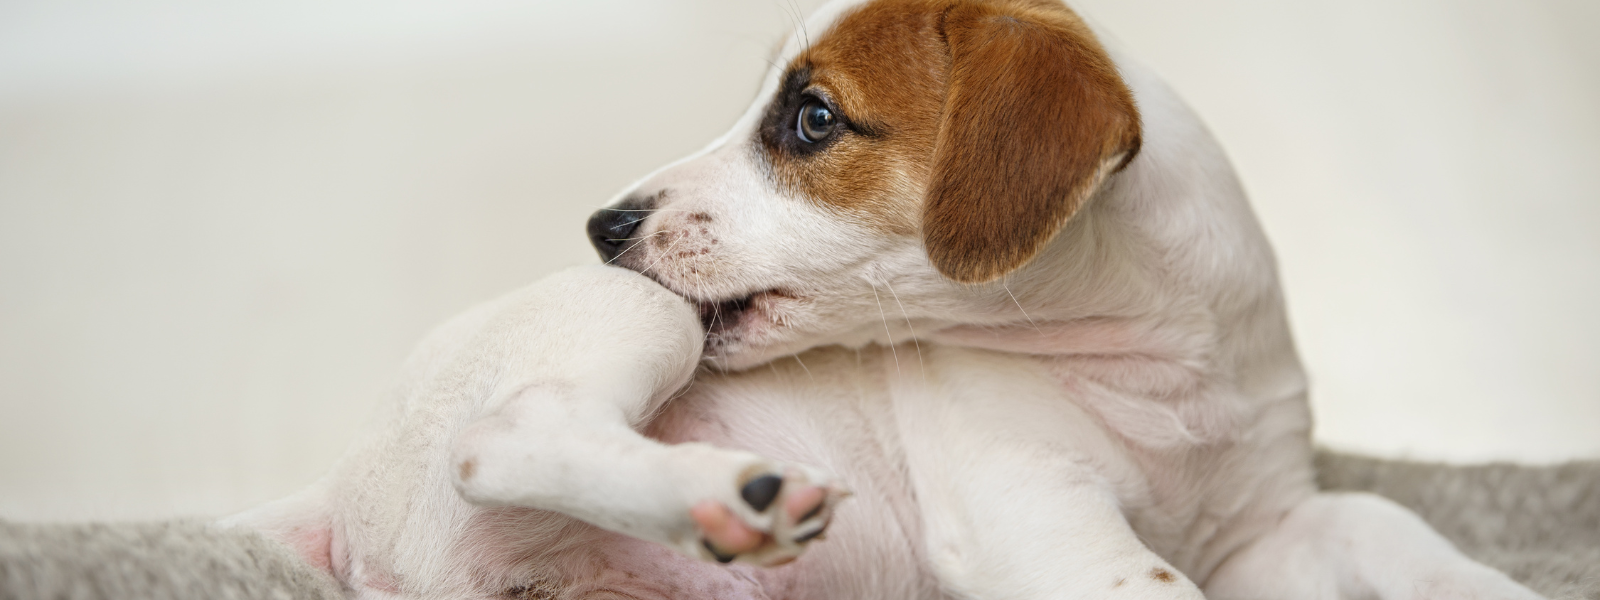 Itchy skin and skin problems in dogs